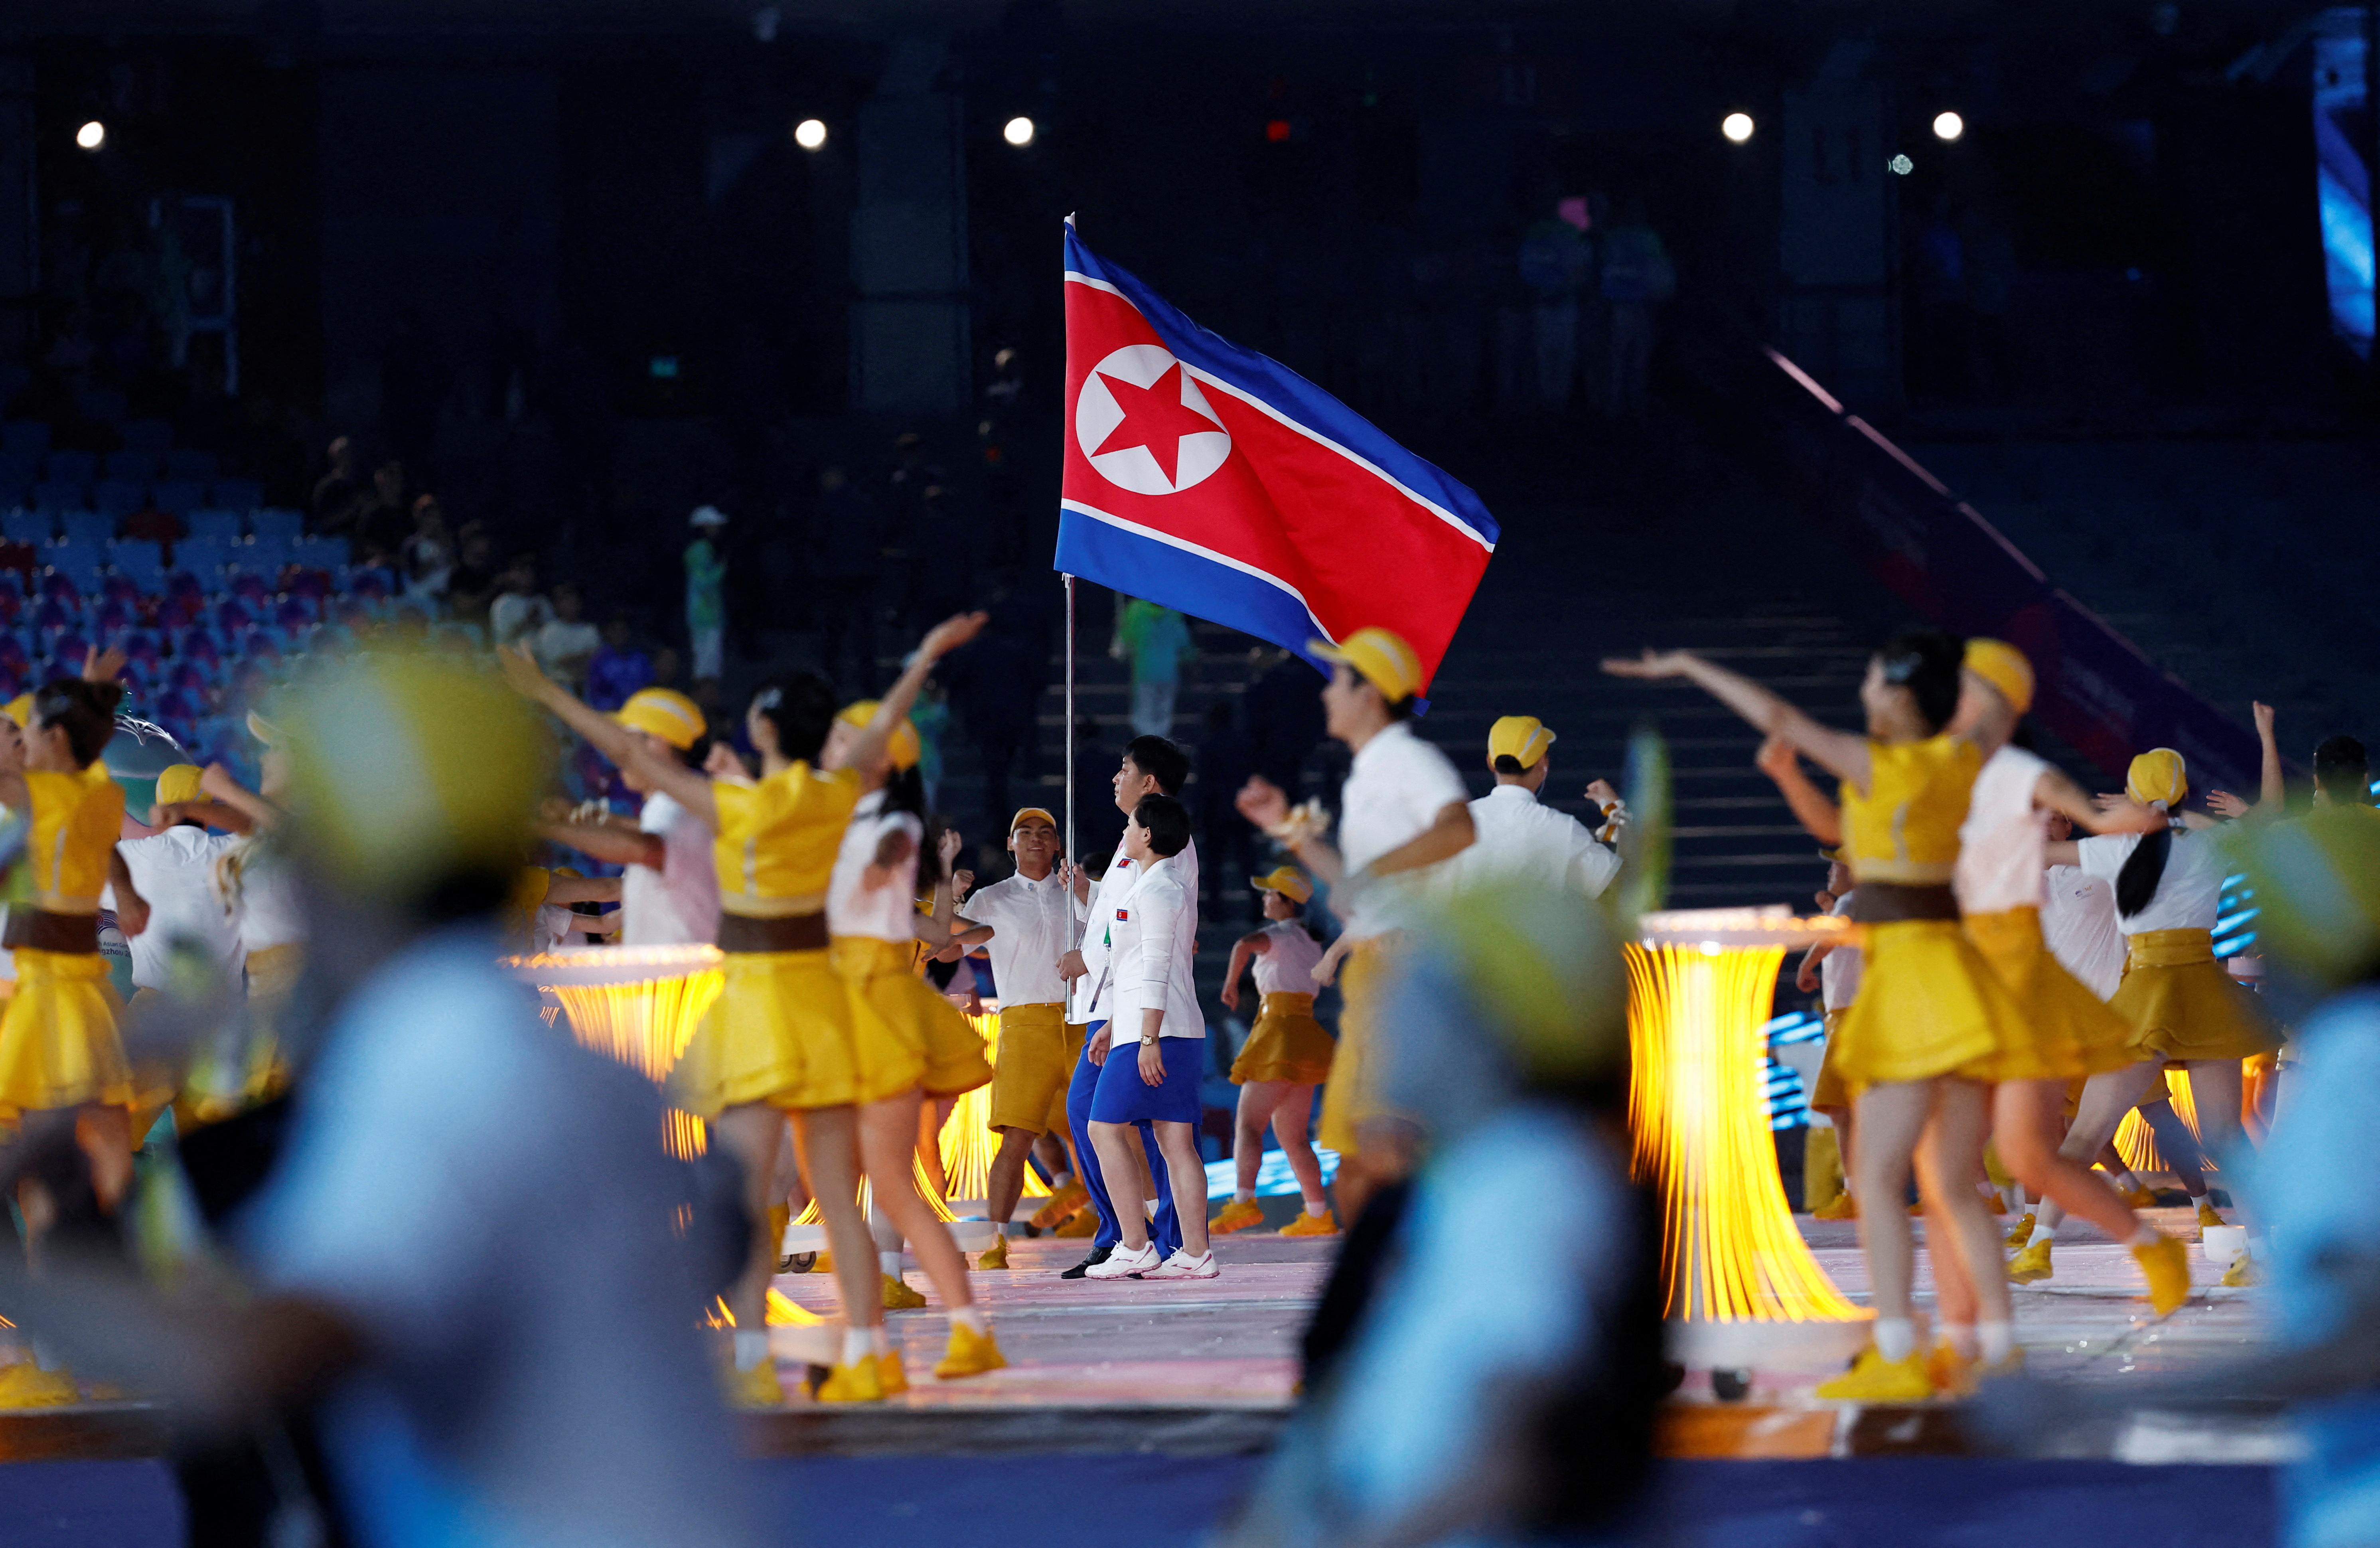 Olympics 2022: North Korea barred from participating in Beijing